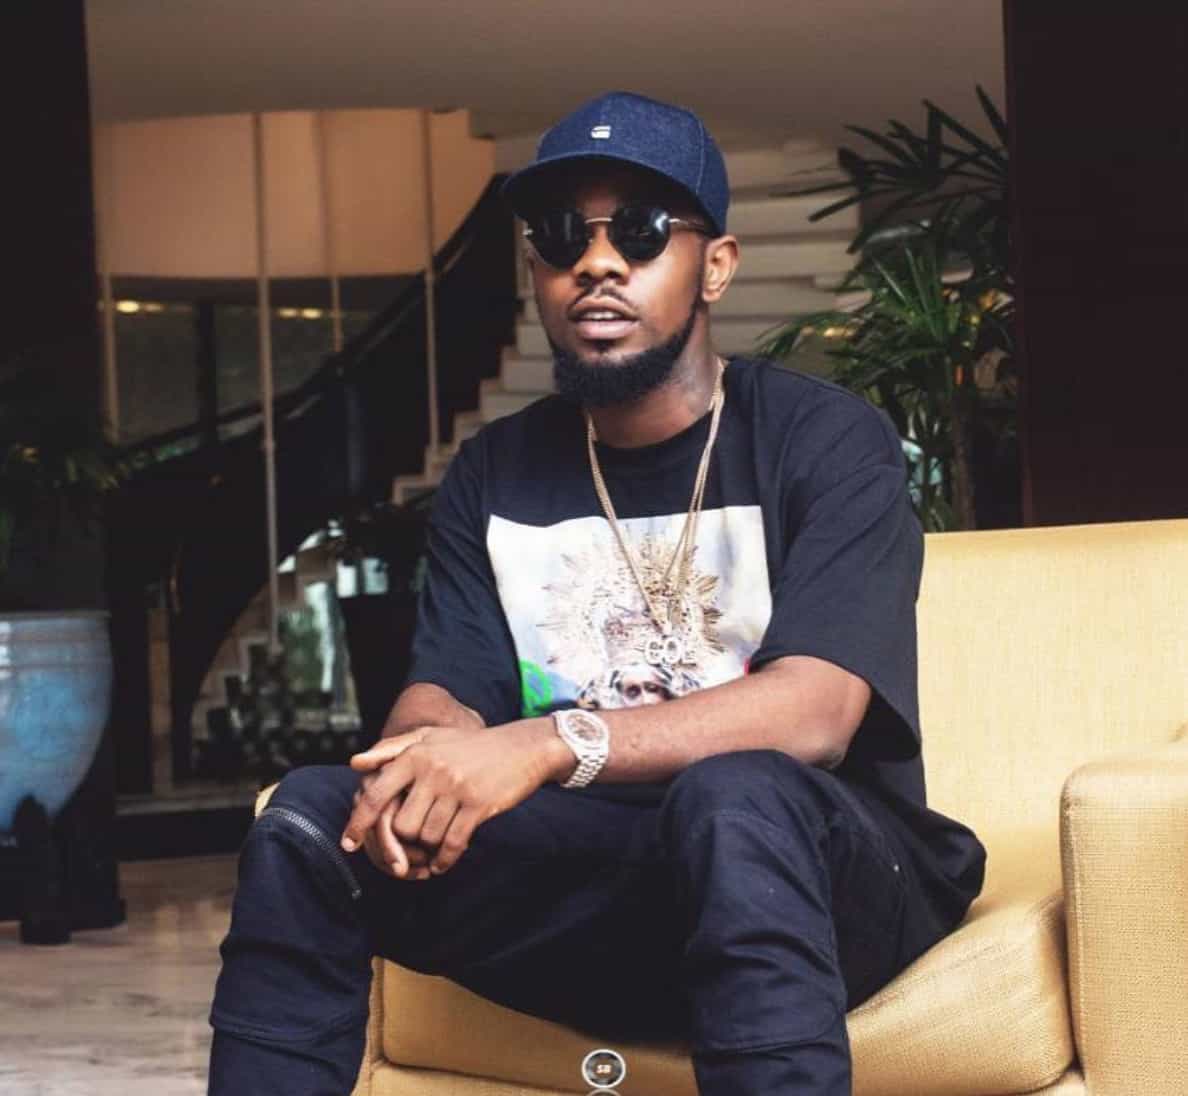 Patoranking Lecture Fans On How To Be Great